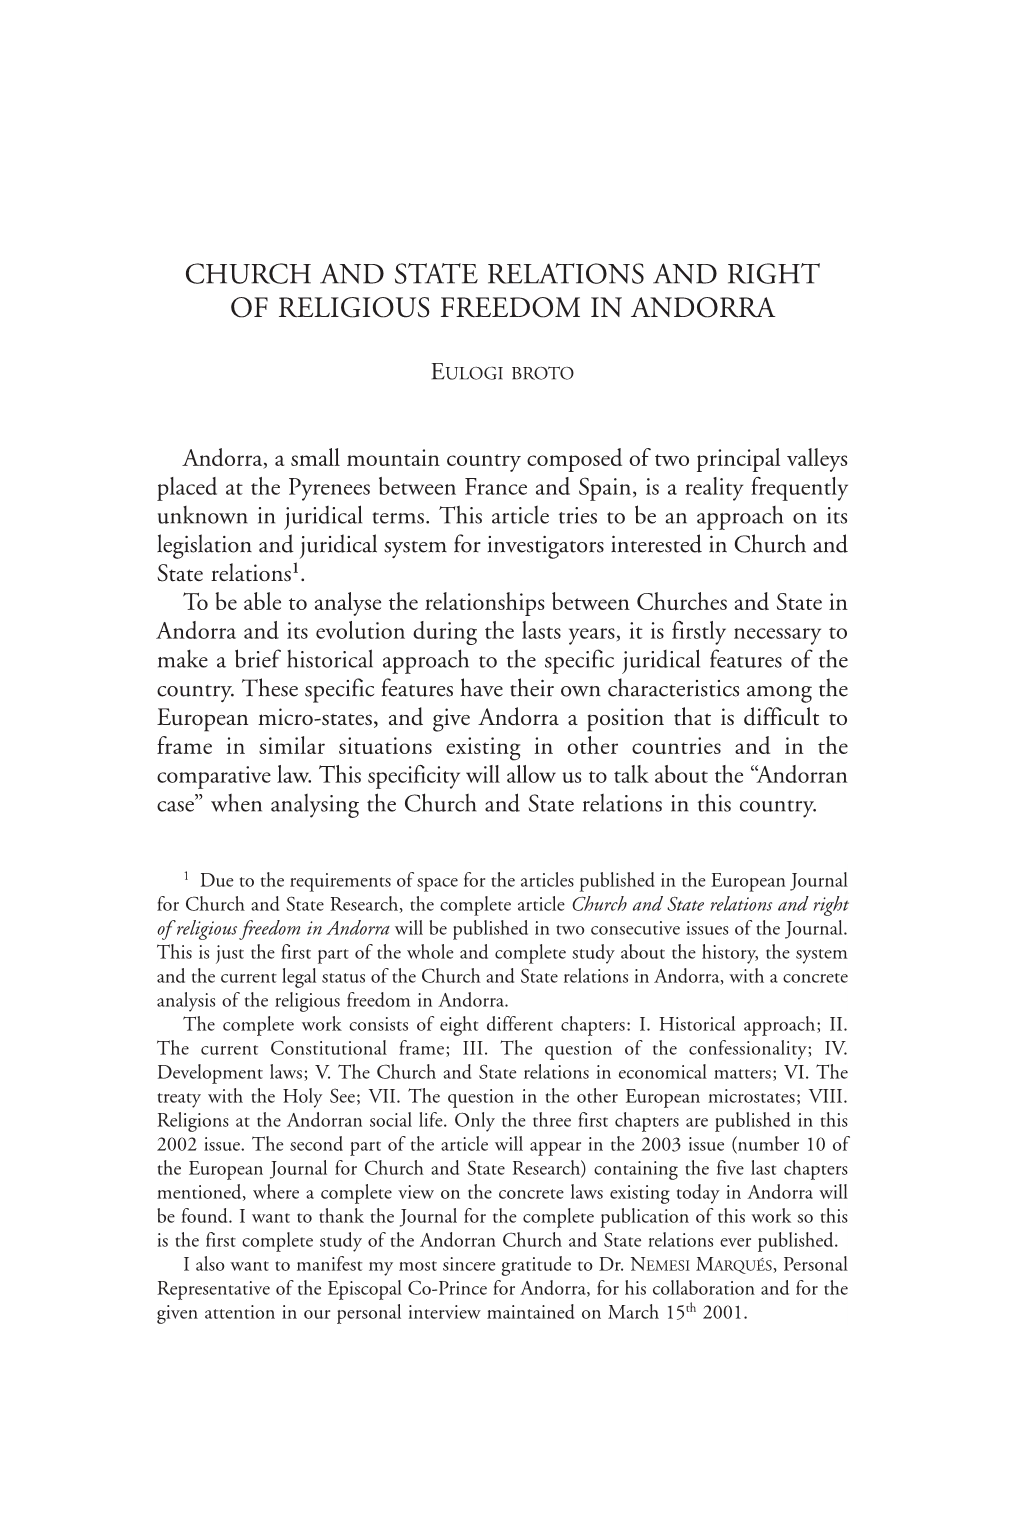 Church and State Relations and Right of Religious Freedom in Andorra